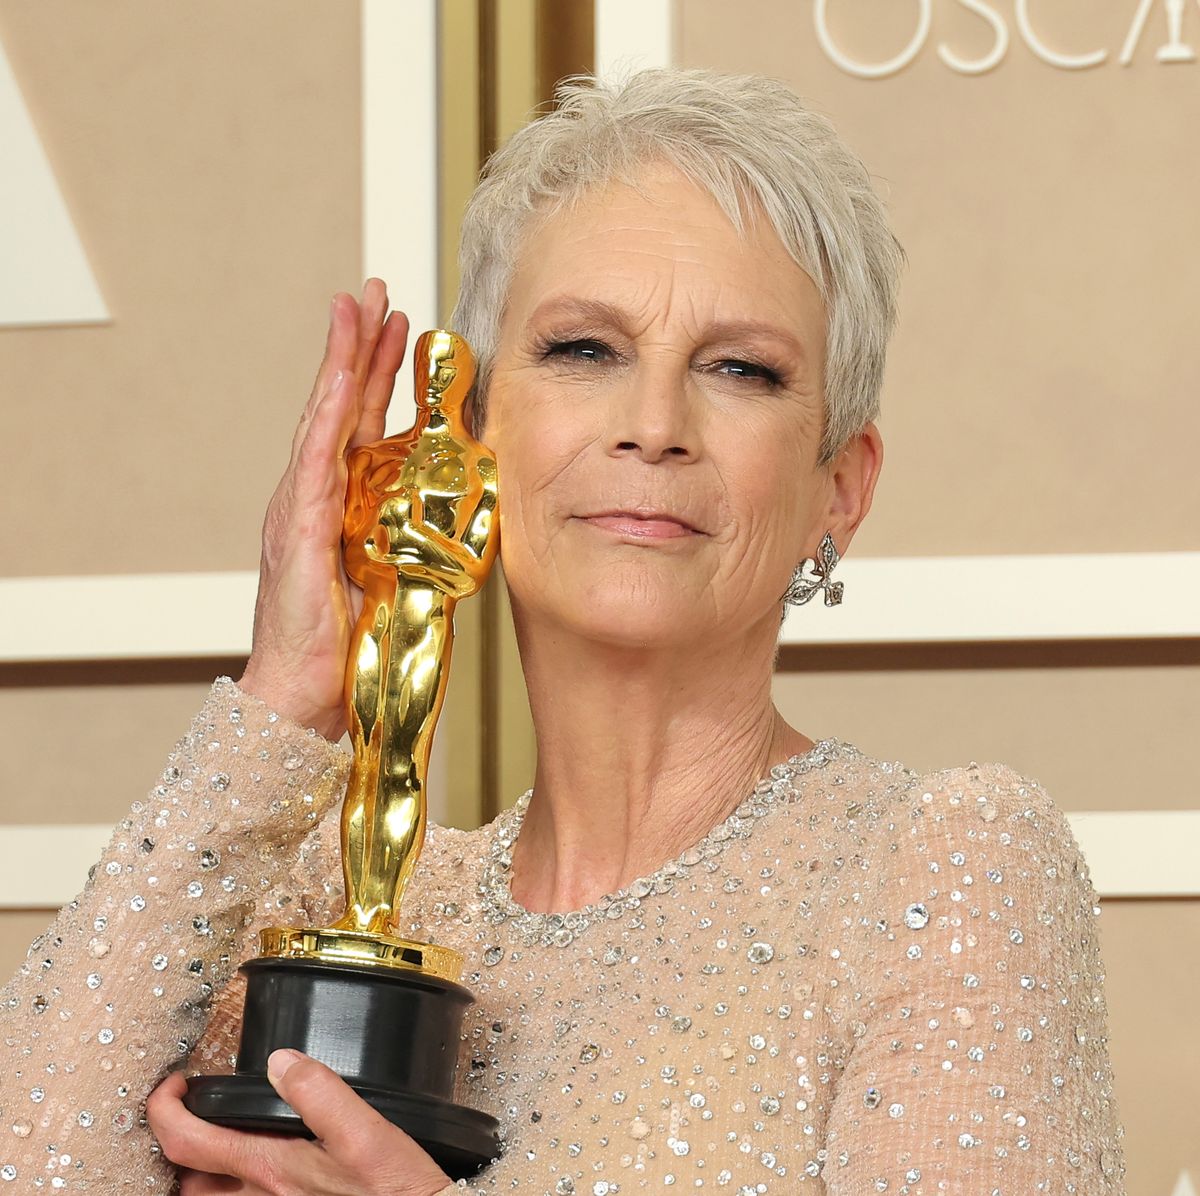 Jamie Lee Curtis Suffers Injury After Oscars Win: 'Agony'